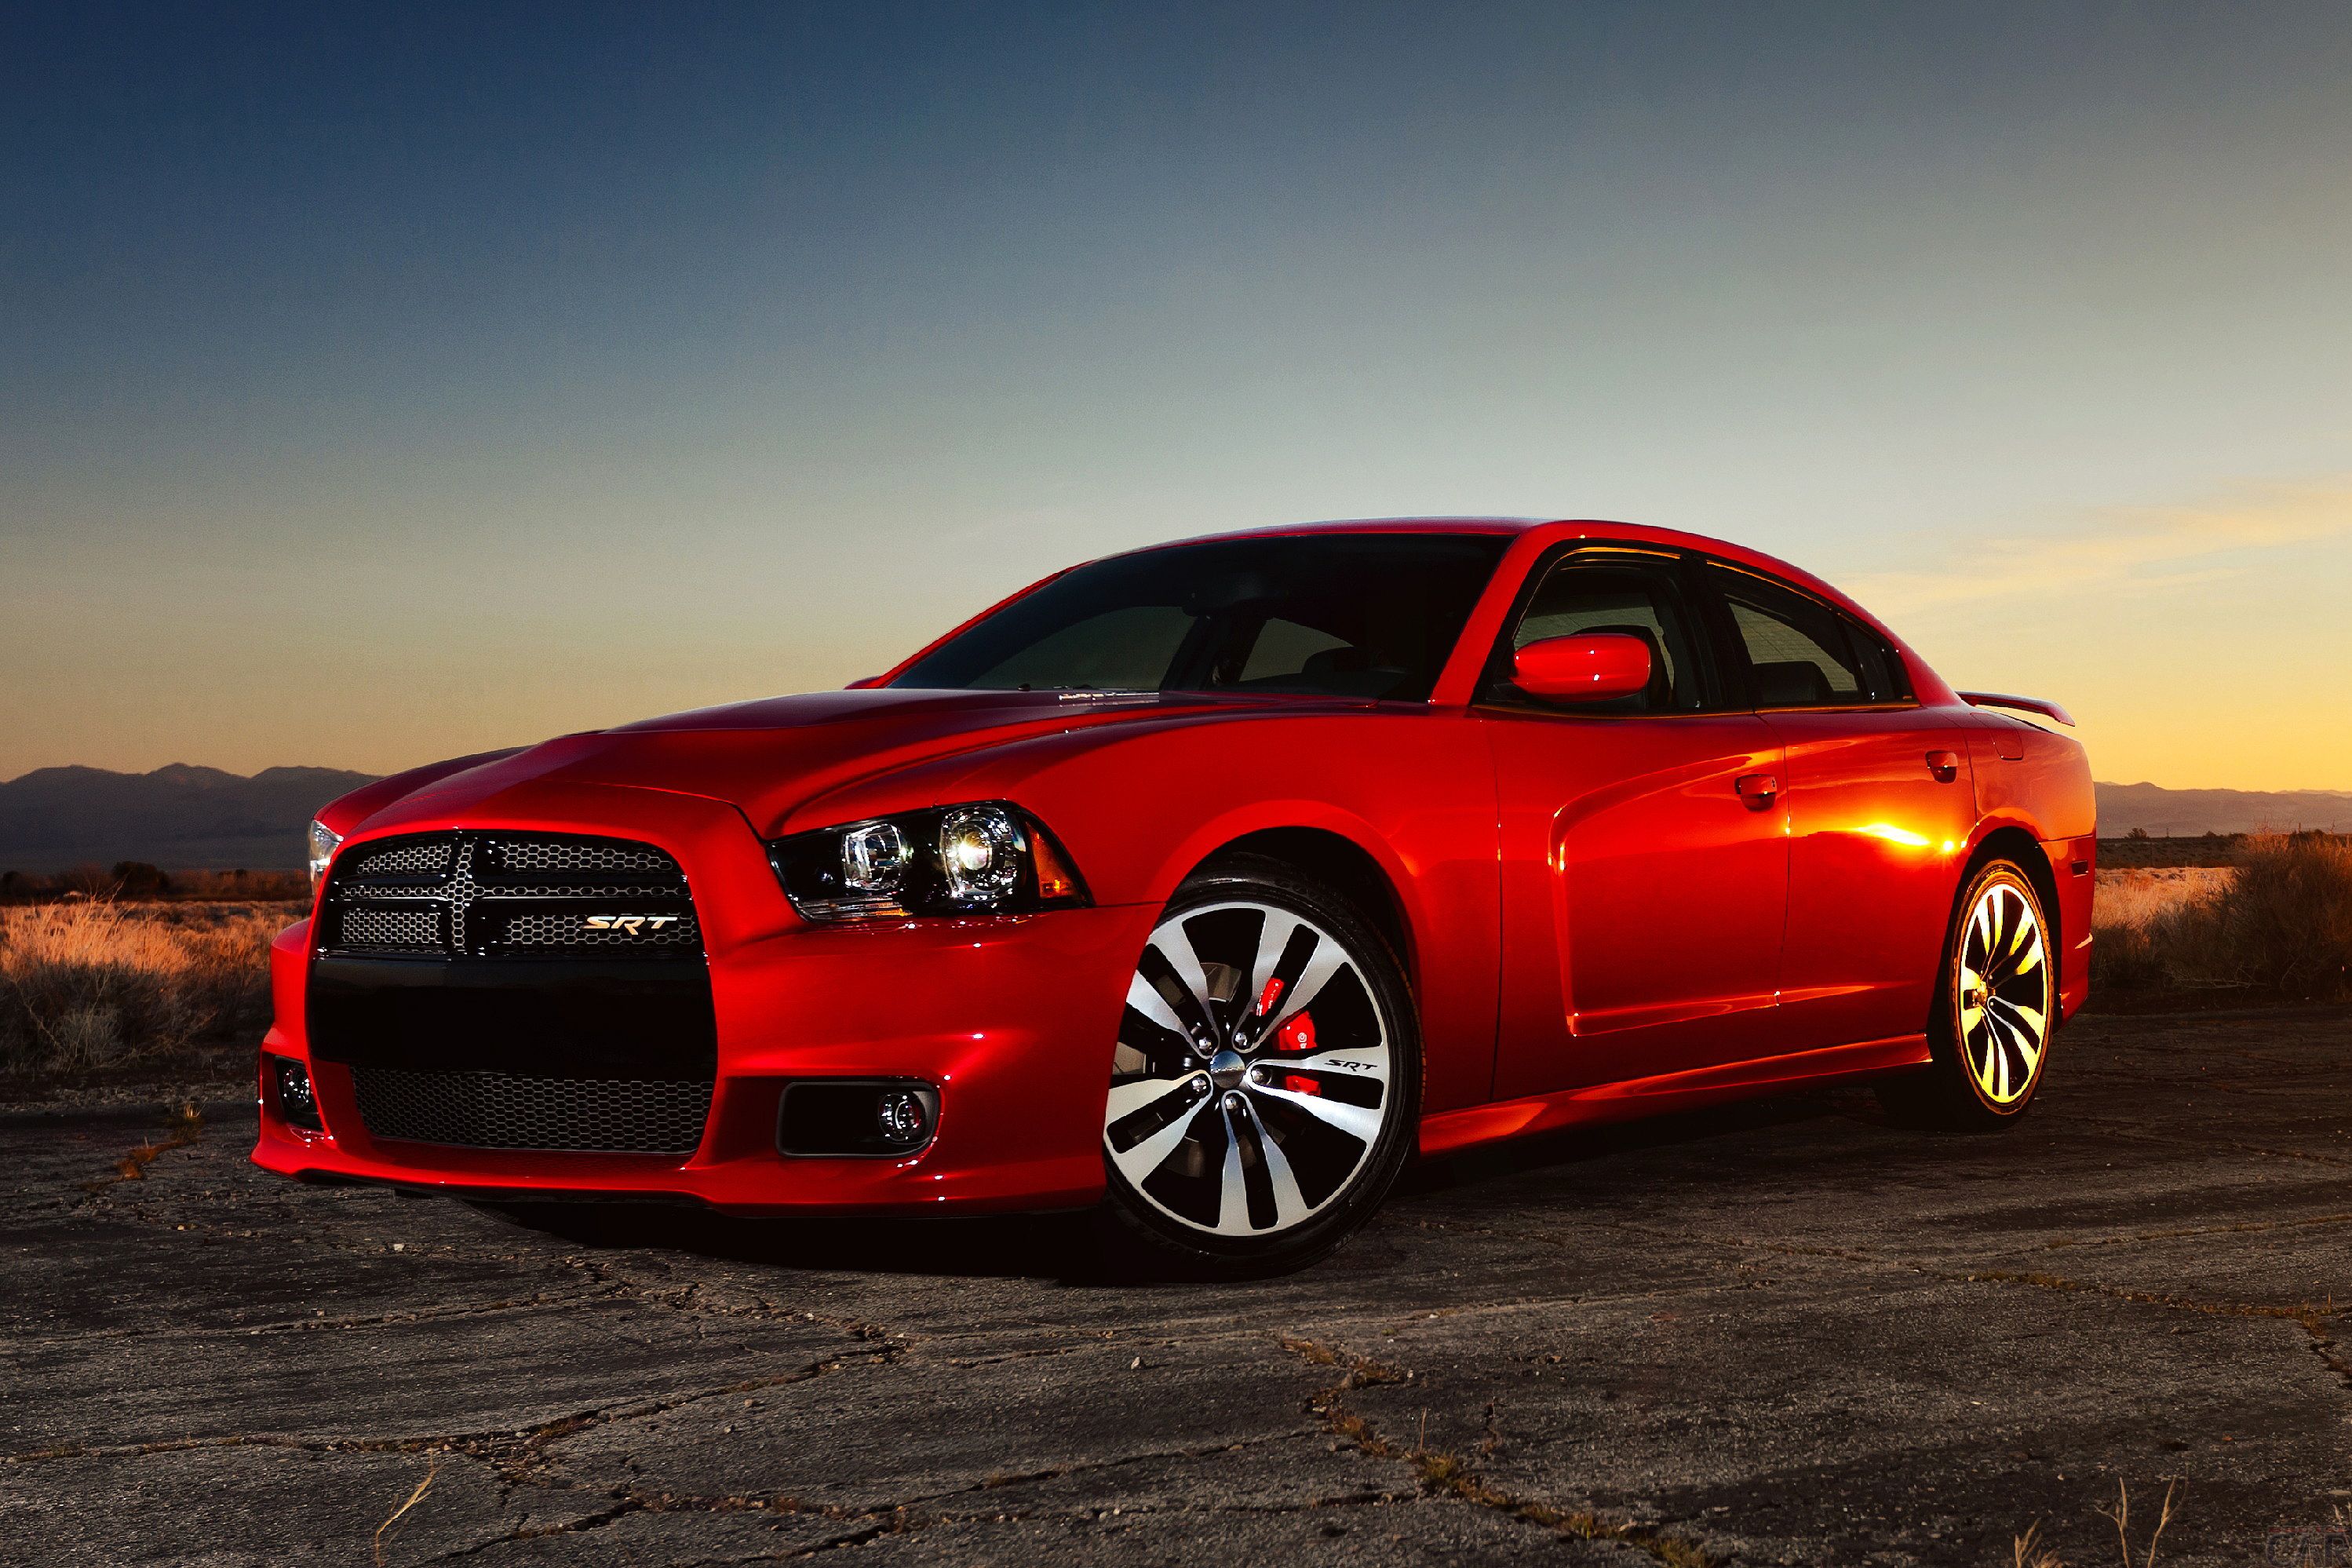 Cool Dodge Charger. Beautiful wallpaper tuned cars for mobile phones.